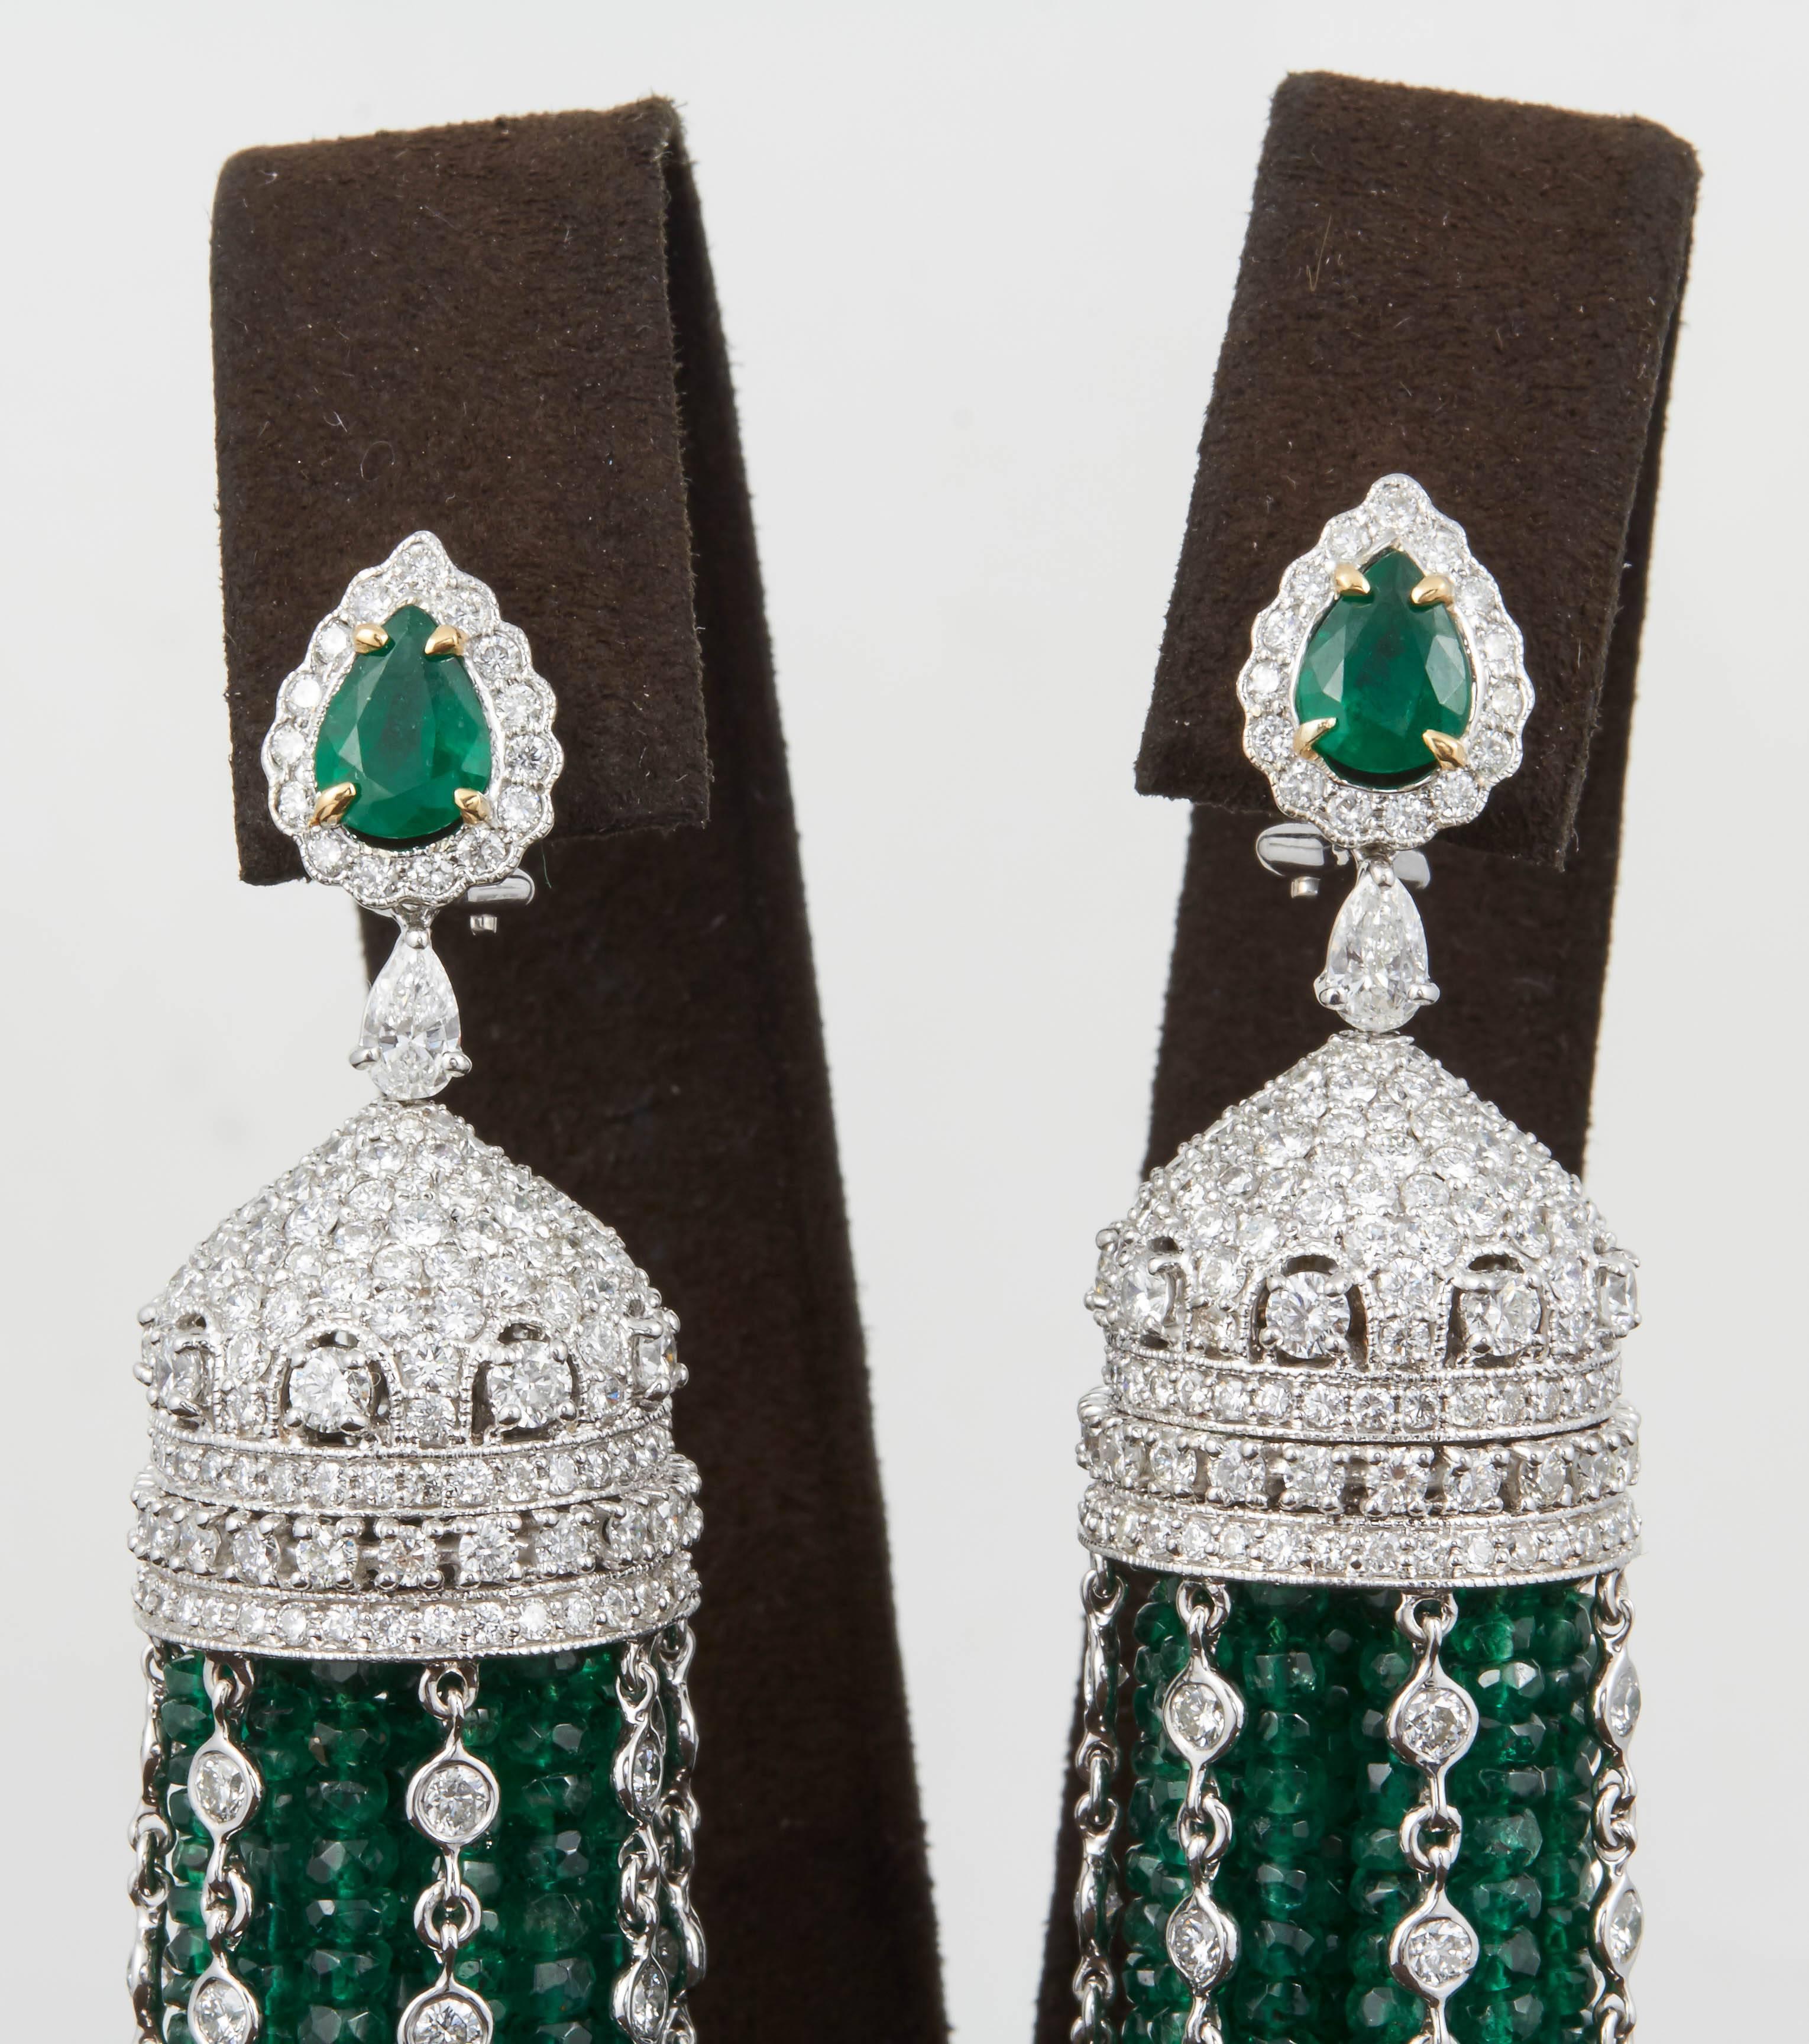 

A FABULOUS pair of earrings! Beautiful emerald green color and movement!

Over 300 carats of emeralds, 18.08 carats of diamonds.

18K white gold.

Approximately 4.75 inches in length from top to bottom.

This piece can be warn casually or to a